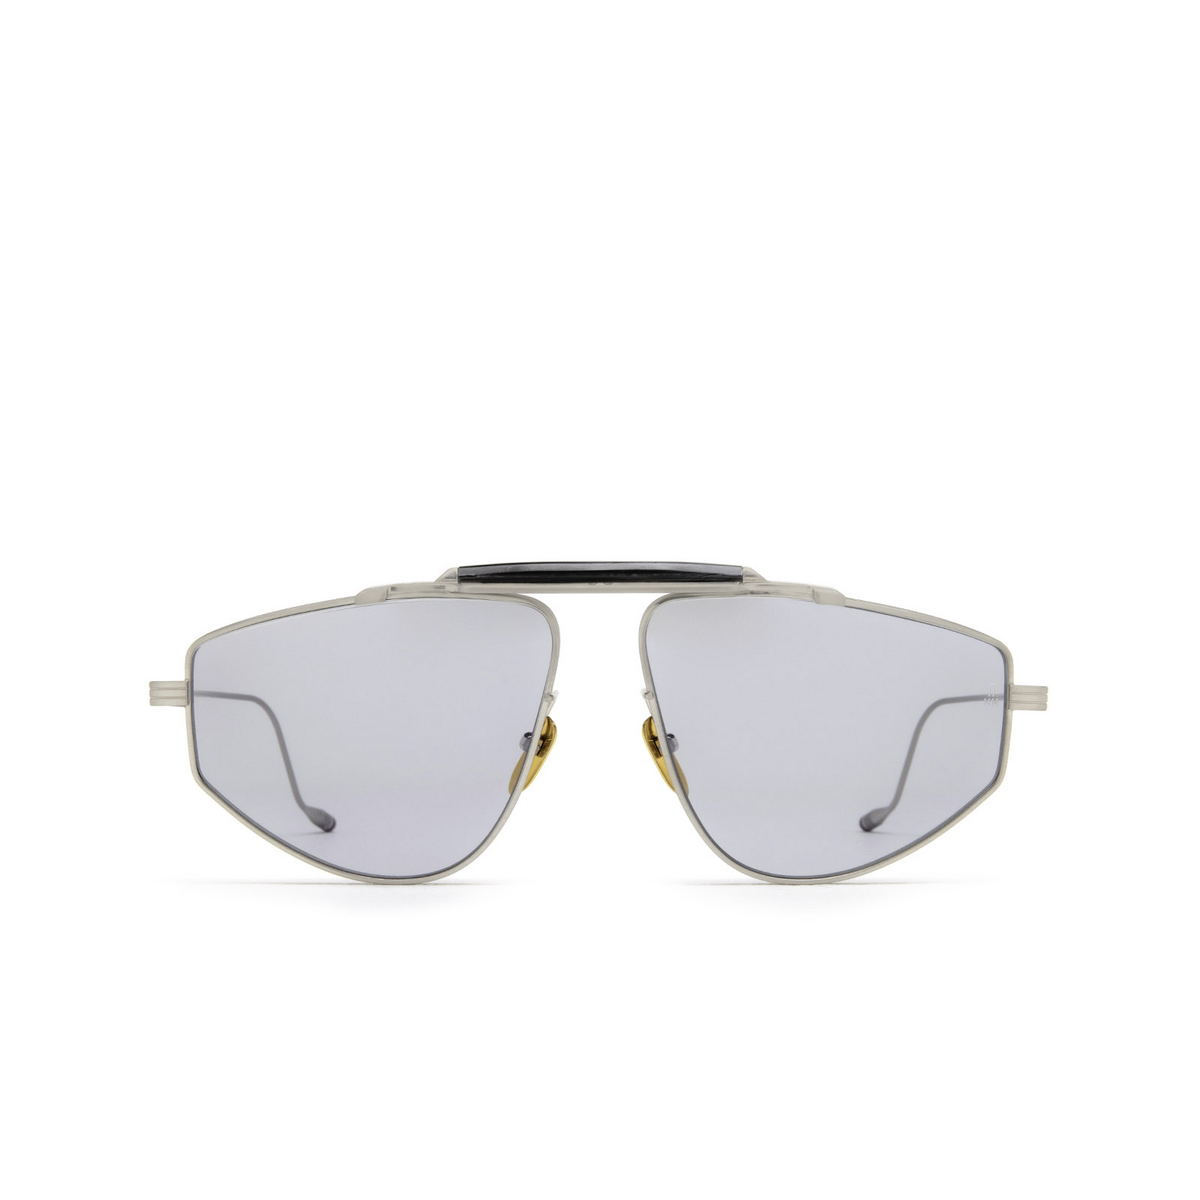 Jacques Marie Mage® Aviator Sunglasses: 1962 color Antique - front view